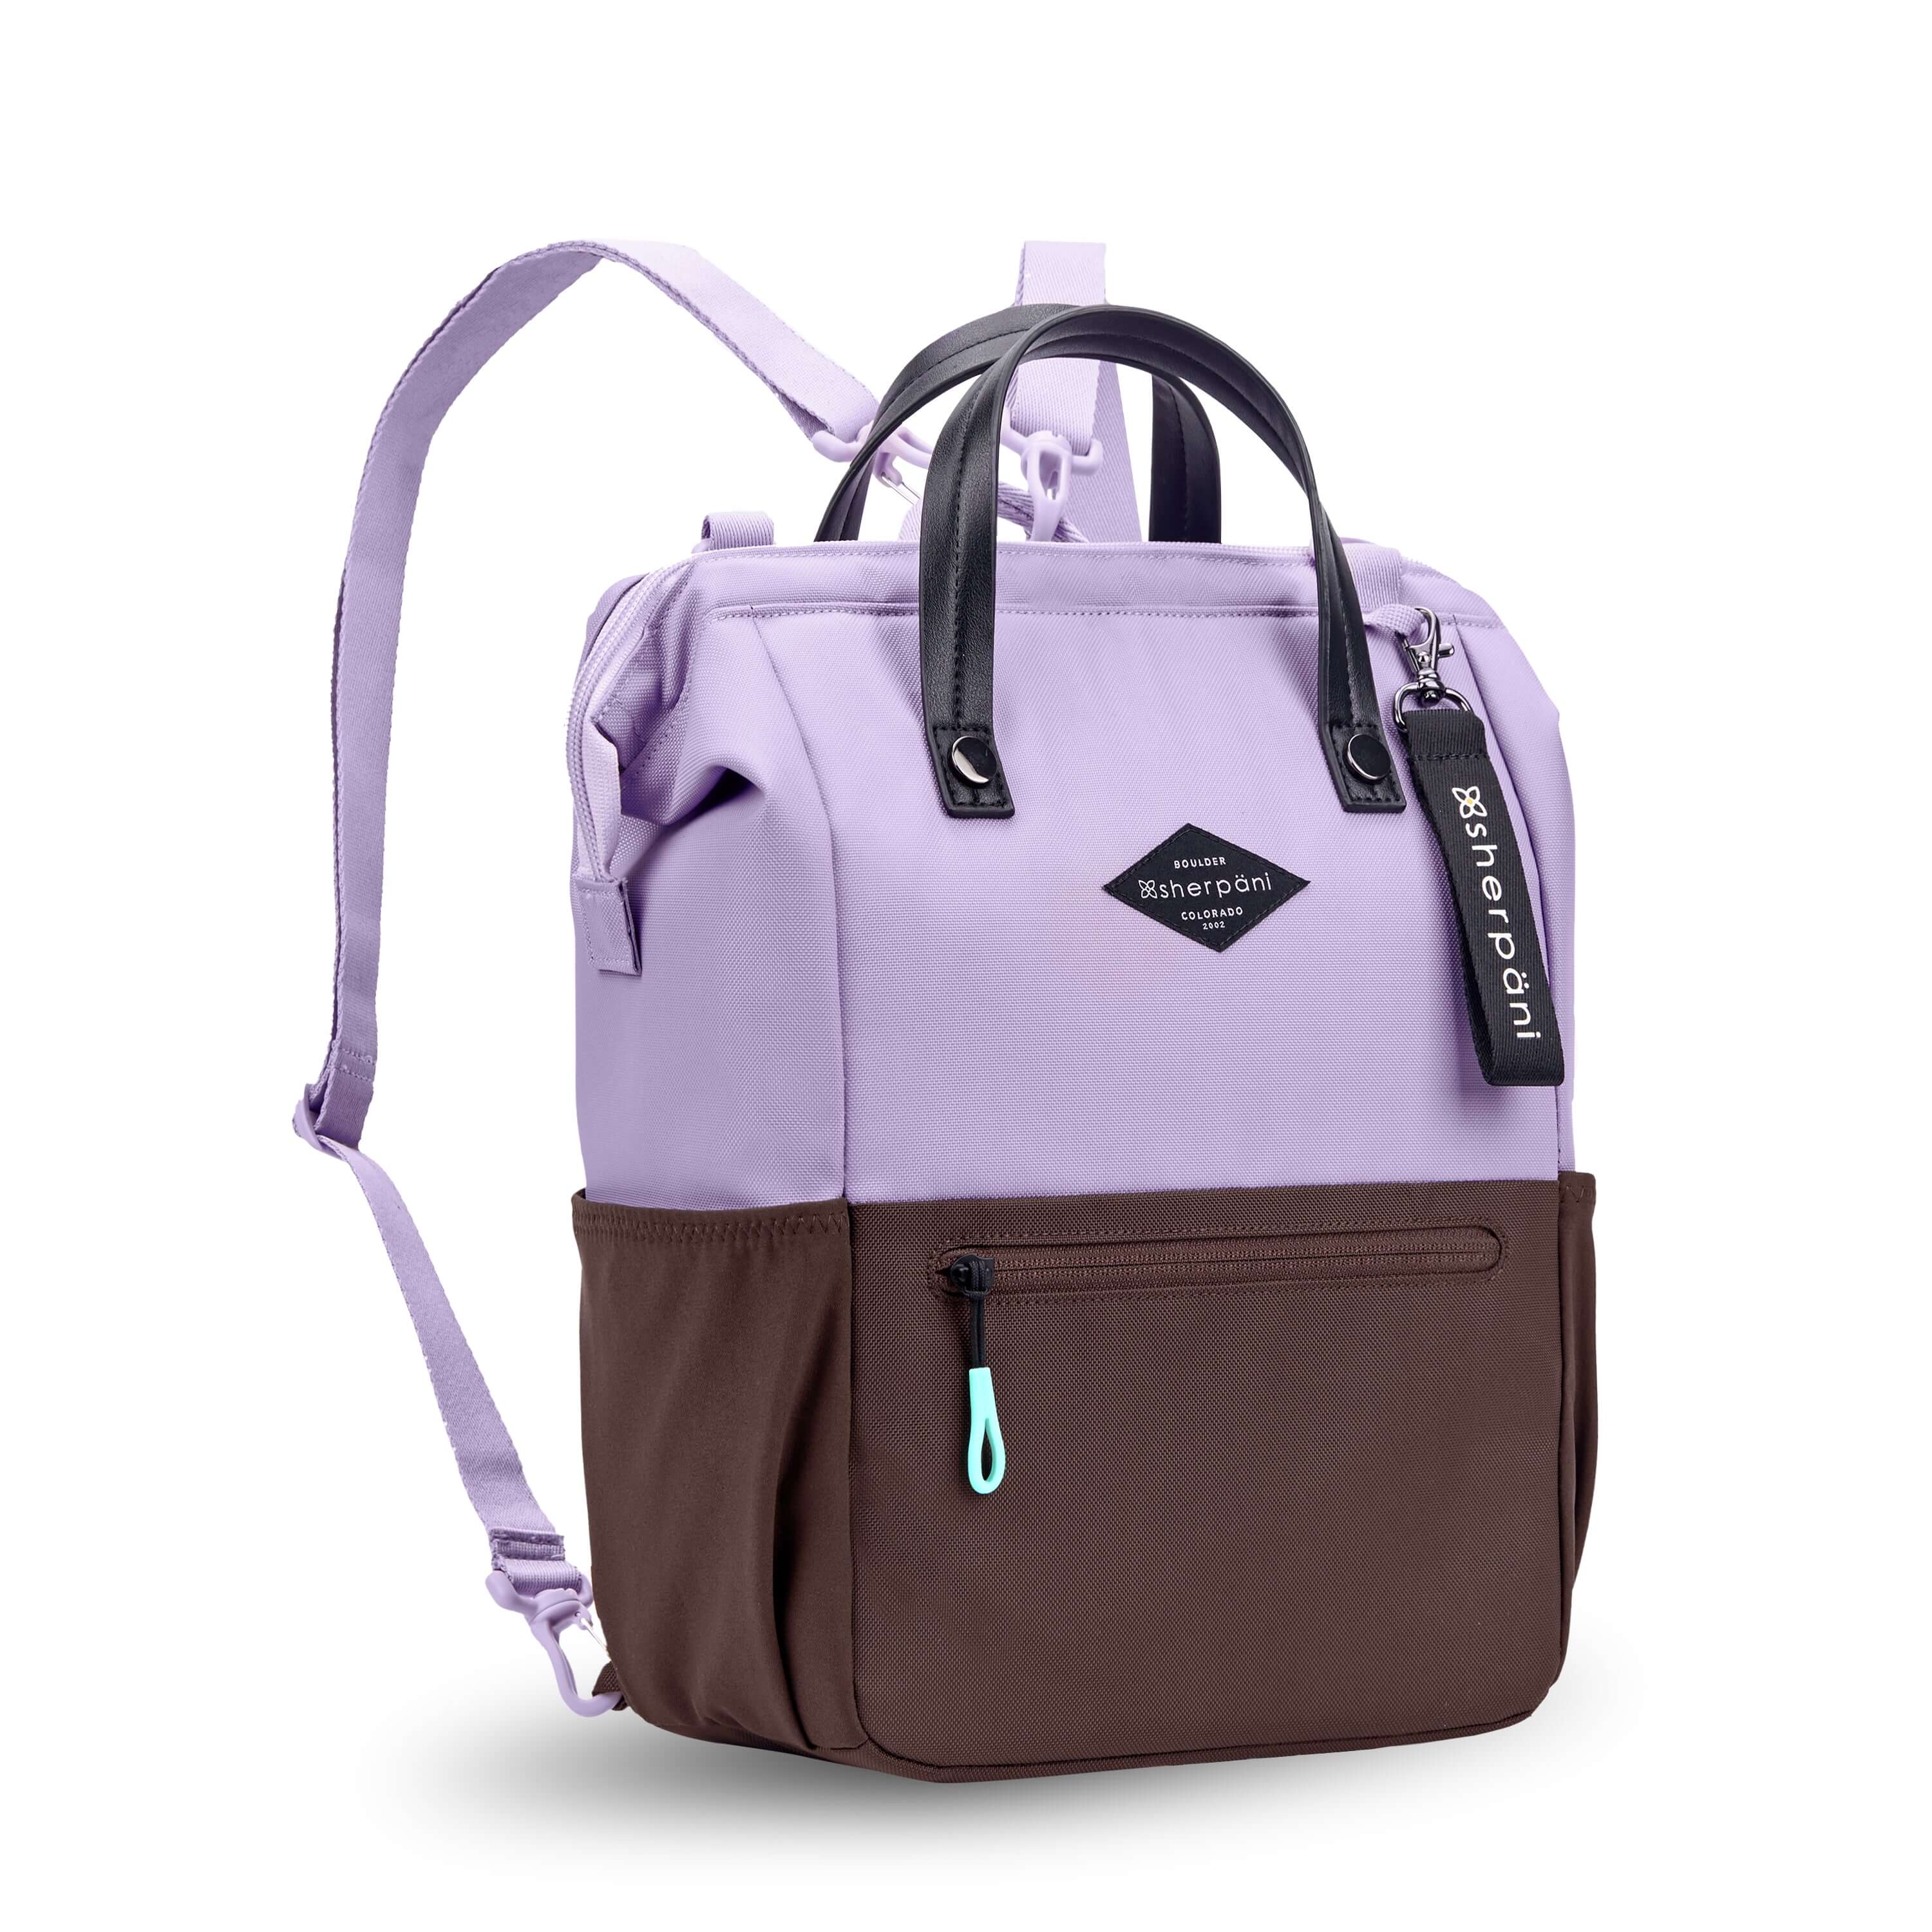 Angled front view of Sherpani three-in-one bag, the Dispatch in Lavender. The bag is two-toned: the top is lavender and the bottom is brown. There is an external zipper pocket on the front panel. Easy-pull zippers are accented in aqua. A branded Sherpani keychain is clipped to the upper right corner. Elastic water bottle holders sit on either side of the bag. It has short tote handles and adjustable/detachable straps that can function for a backpack or crossbody. #color_lavender